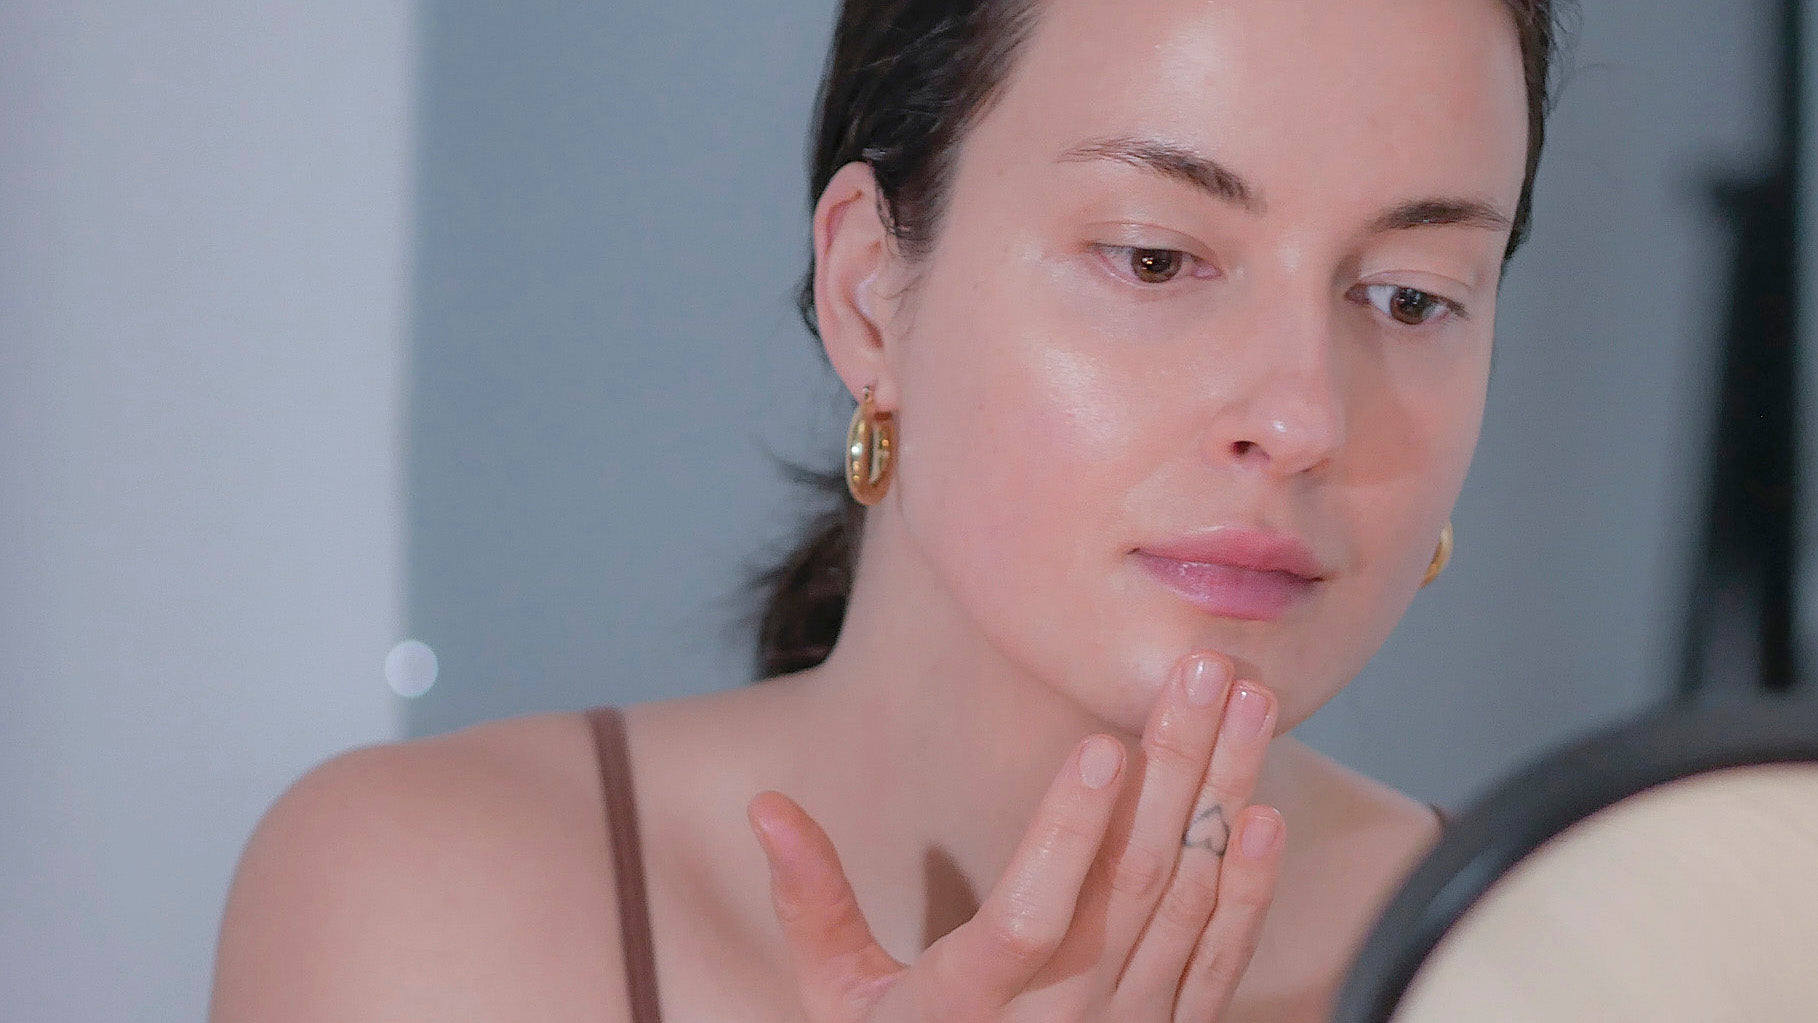 Woman with hair pulled back applying restorative night serum to face.